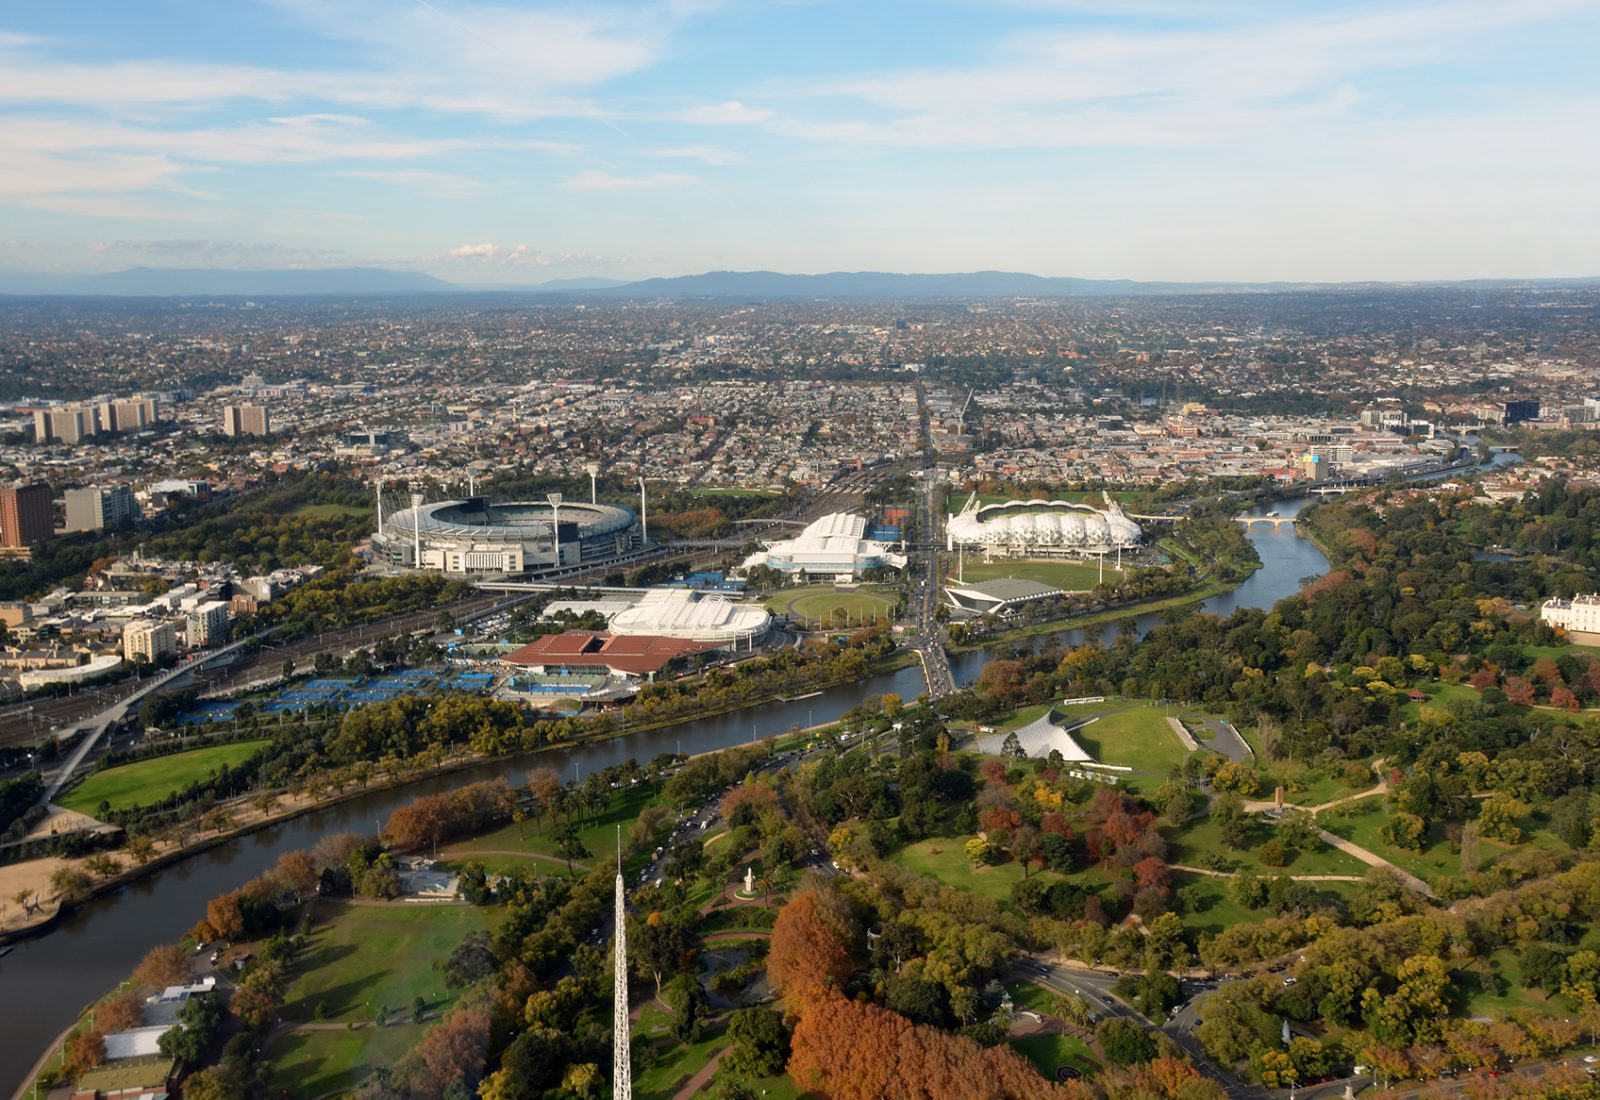 Aerial View of Melbourne's Eastern Suburbs including MCG, Rod Laver Arena and Yarra River.